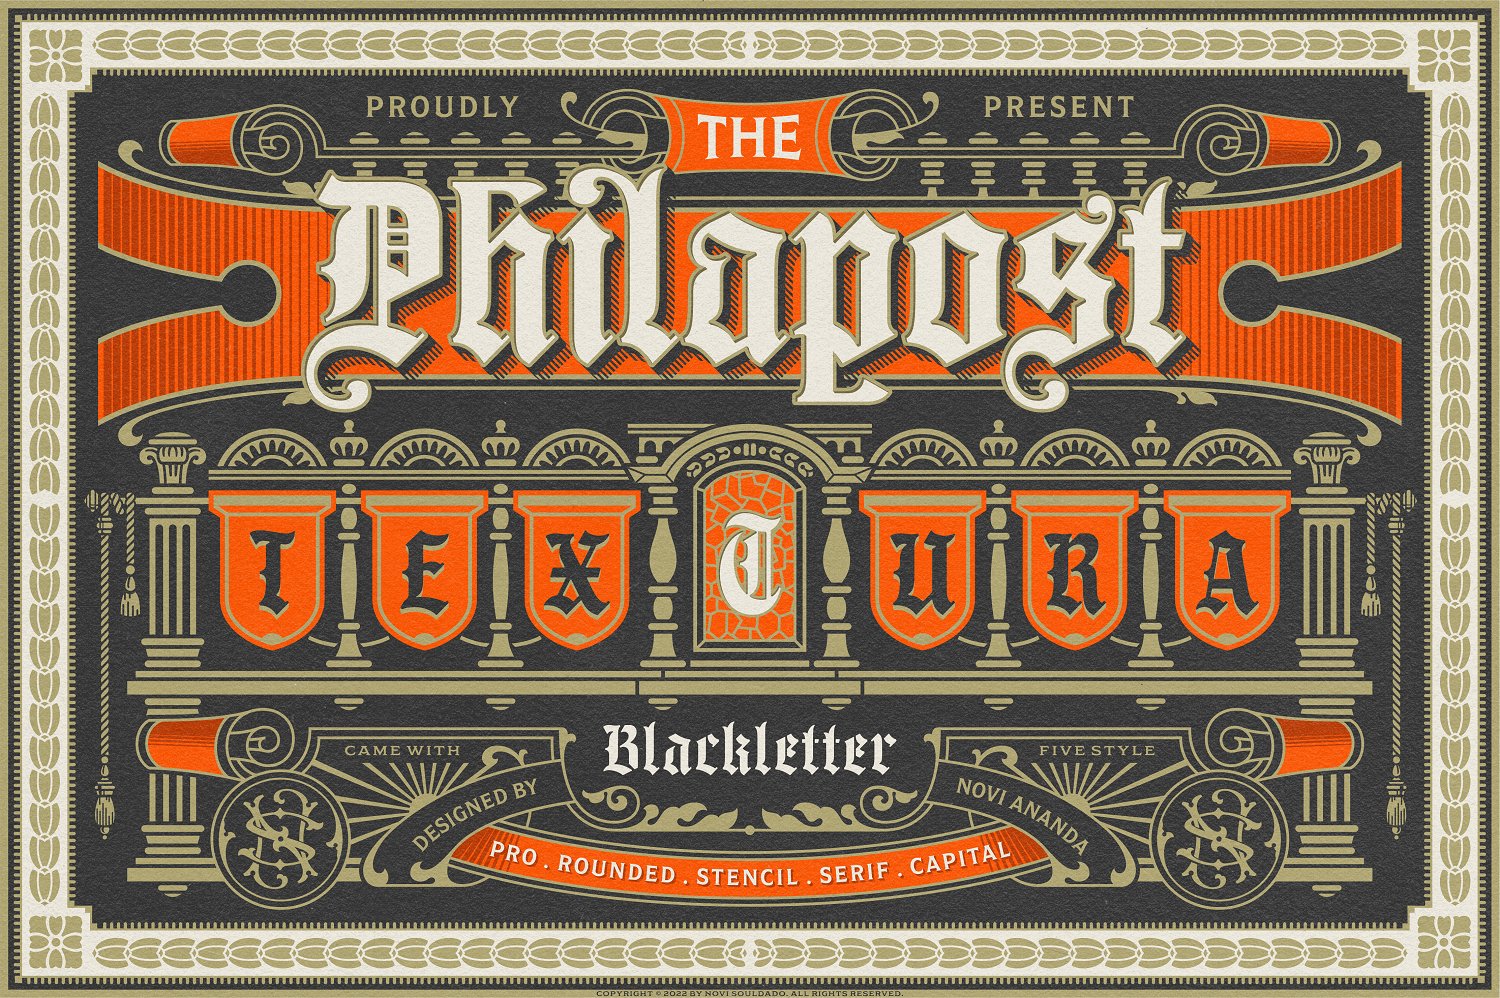 NS Philapost Font Family 40% OFF! cover image.